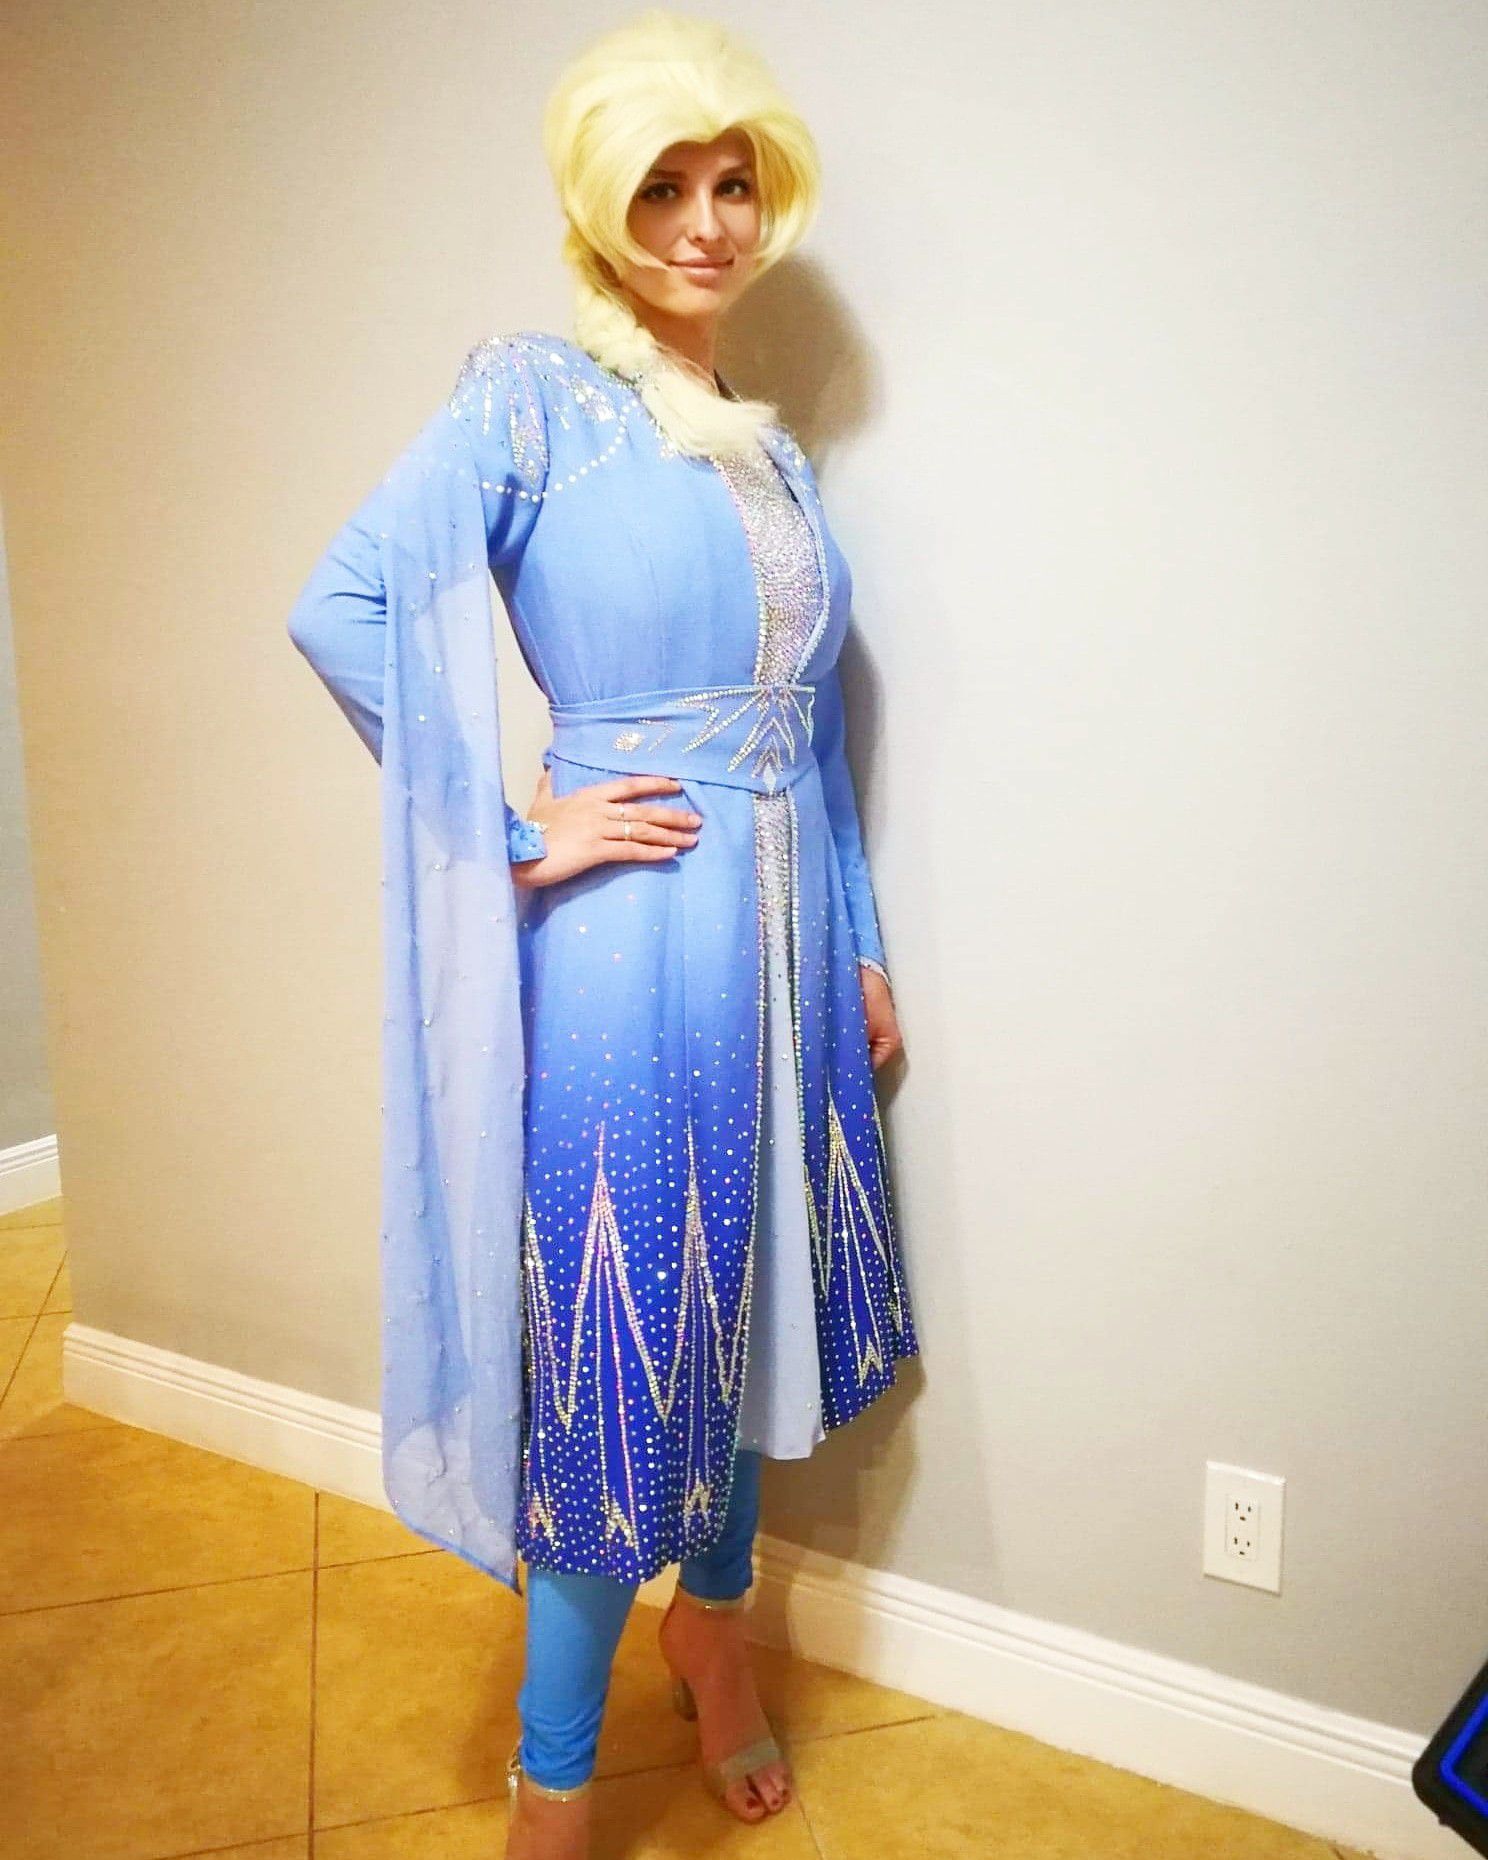 Frozen2 ,Elsa ,entertainment for kids, Birthday party character